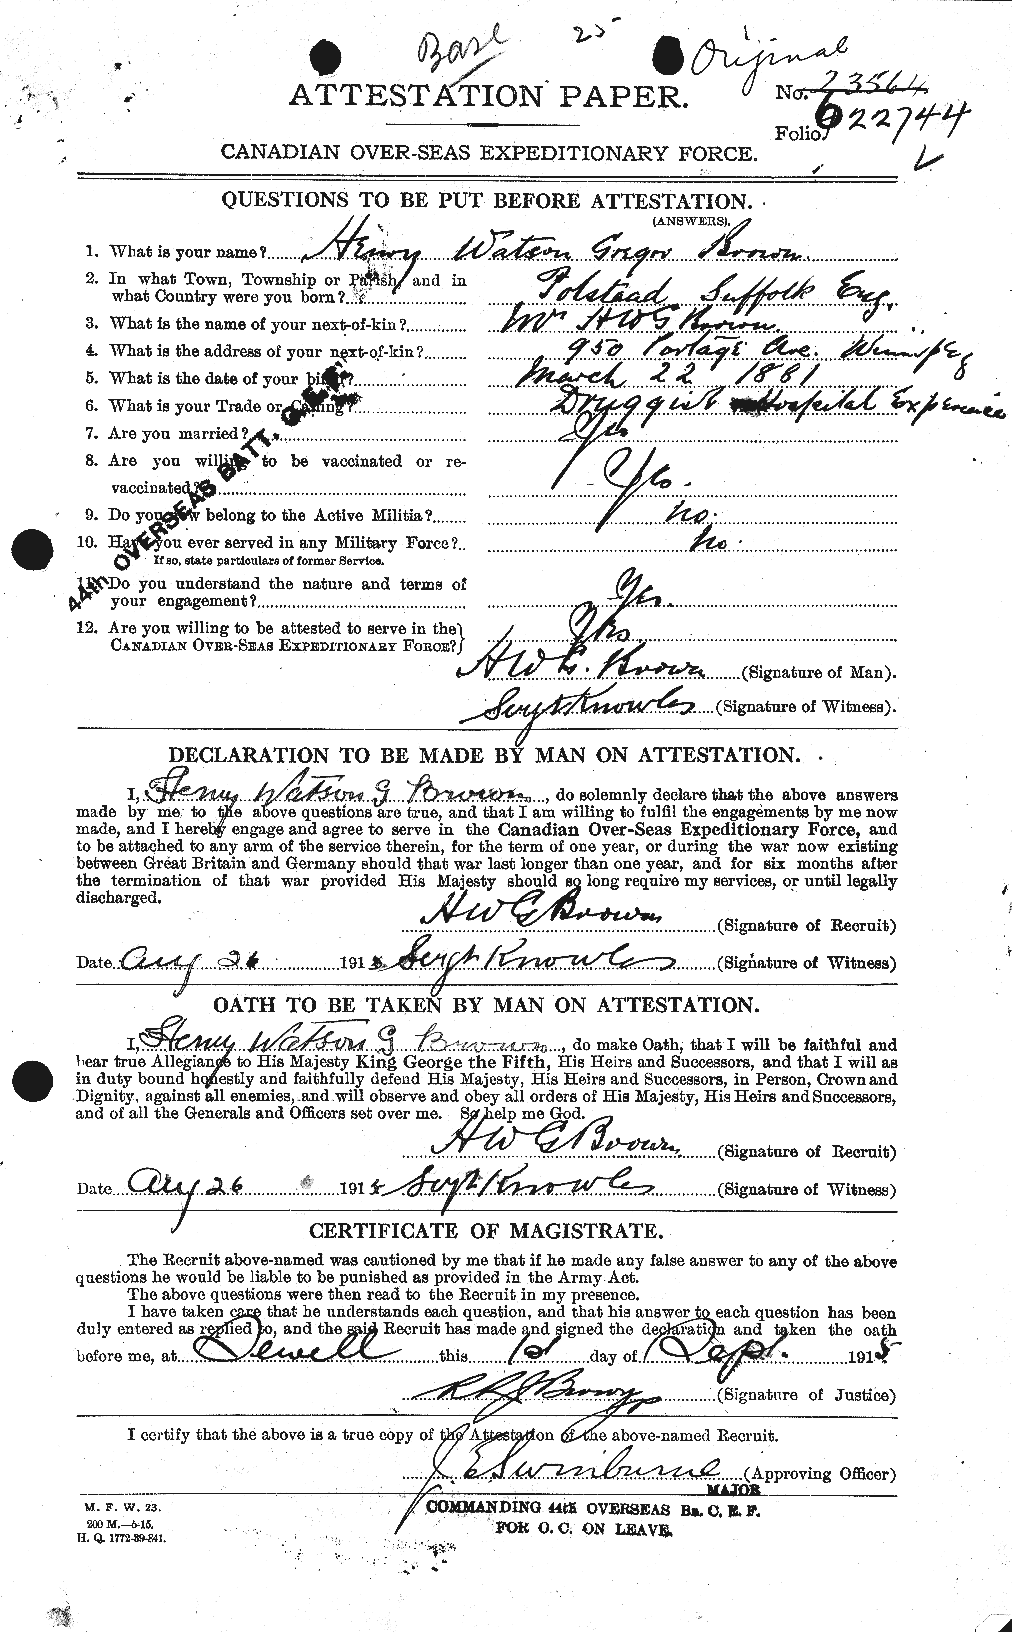 Personnel Records of the First World War - CEF 265540a